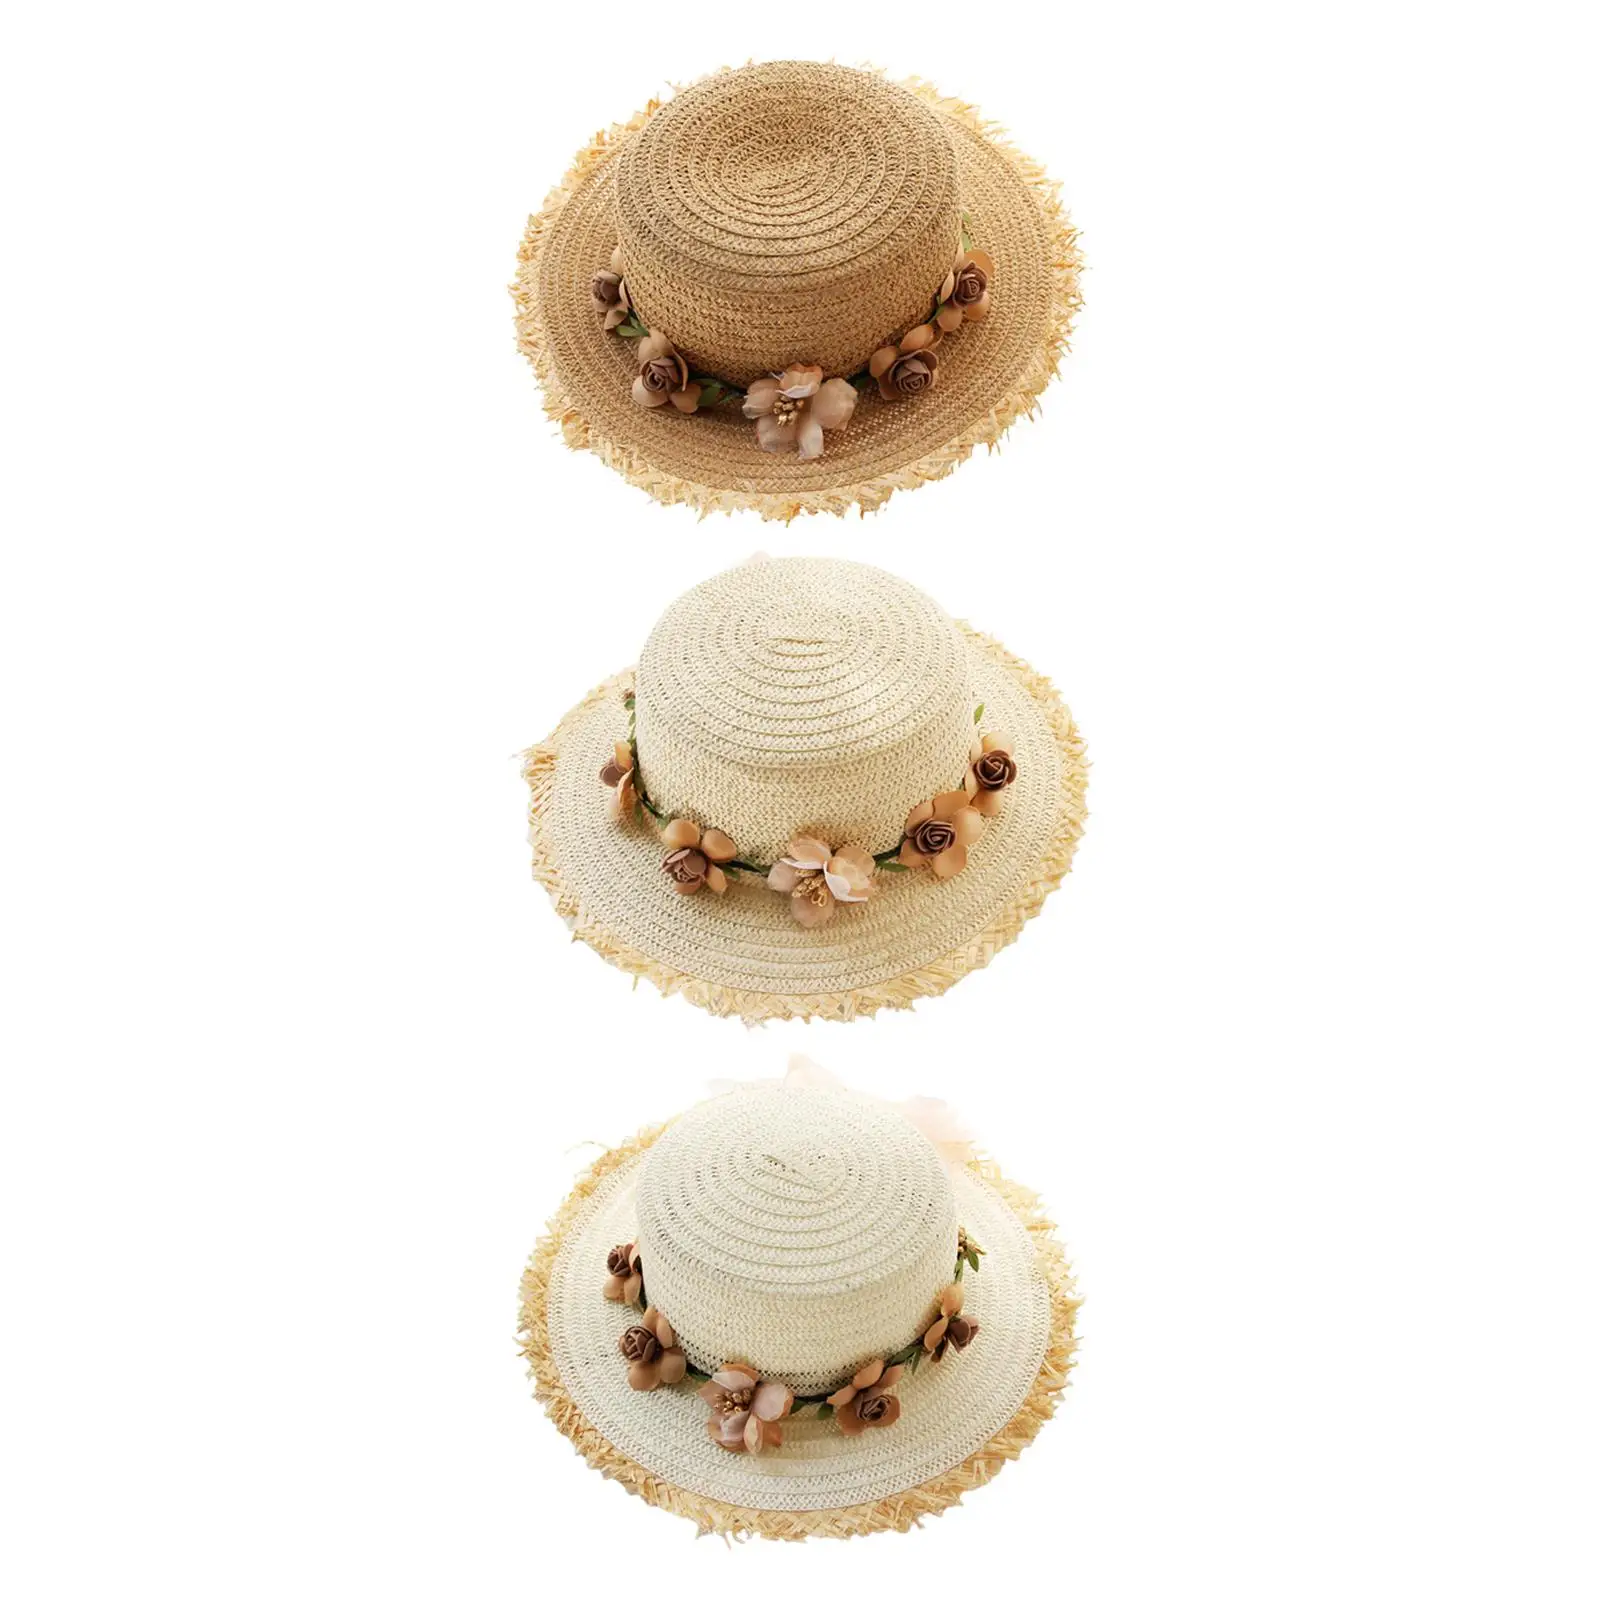 Women Summer Straw Caps with Removable Garland Party Hat Beach Cap for Fancy Dress Women